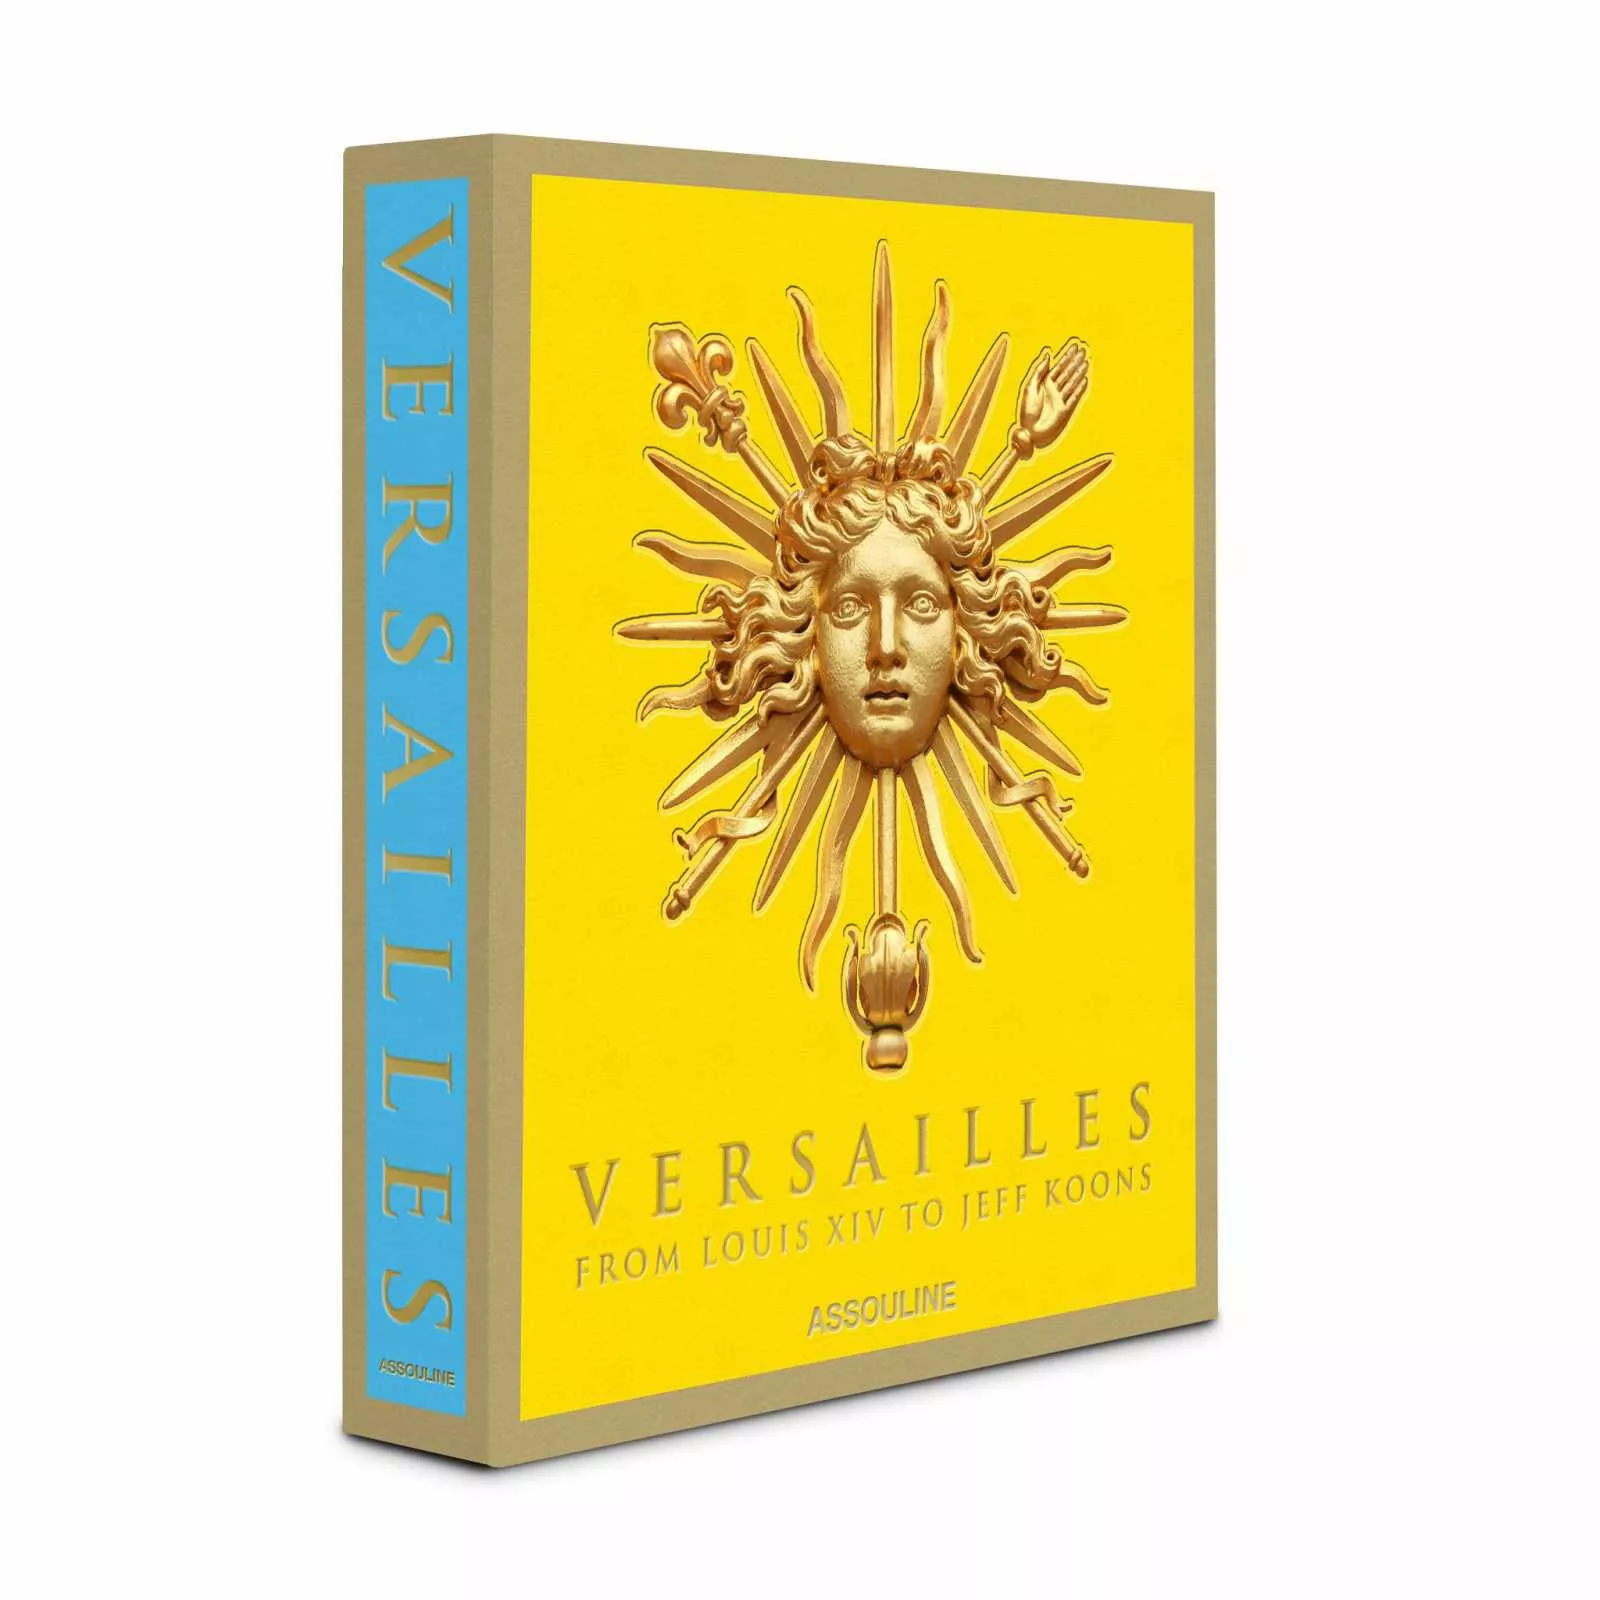 Книга "Versailles:From Louis XIV to Jeff Koons" Assouline Ultimate&Special Editions (9781614289623) - Фото nav 2